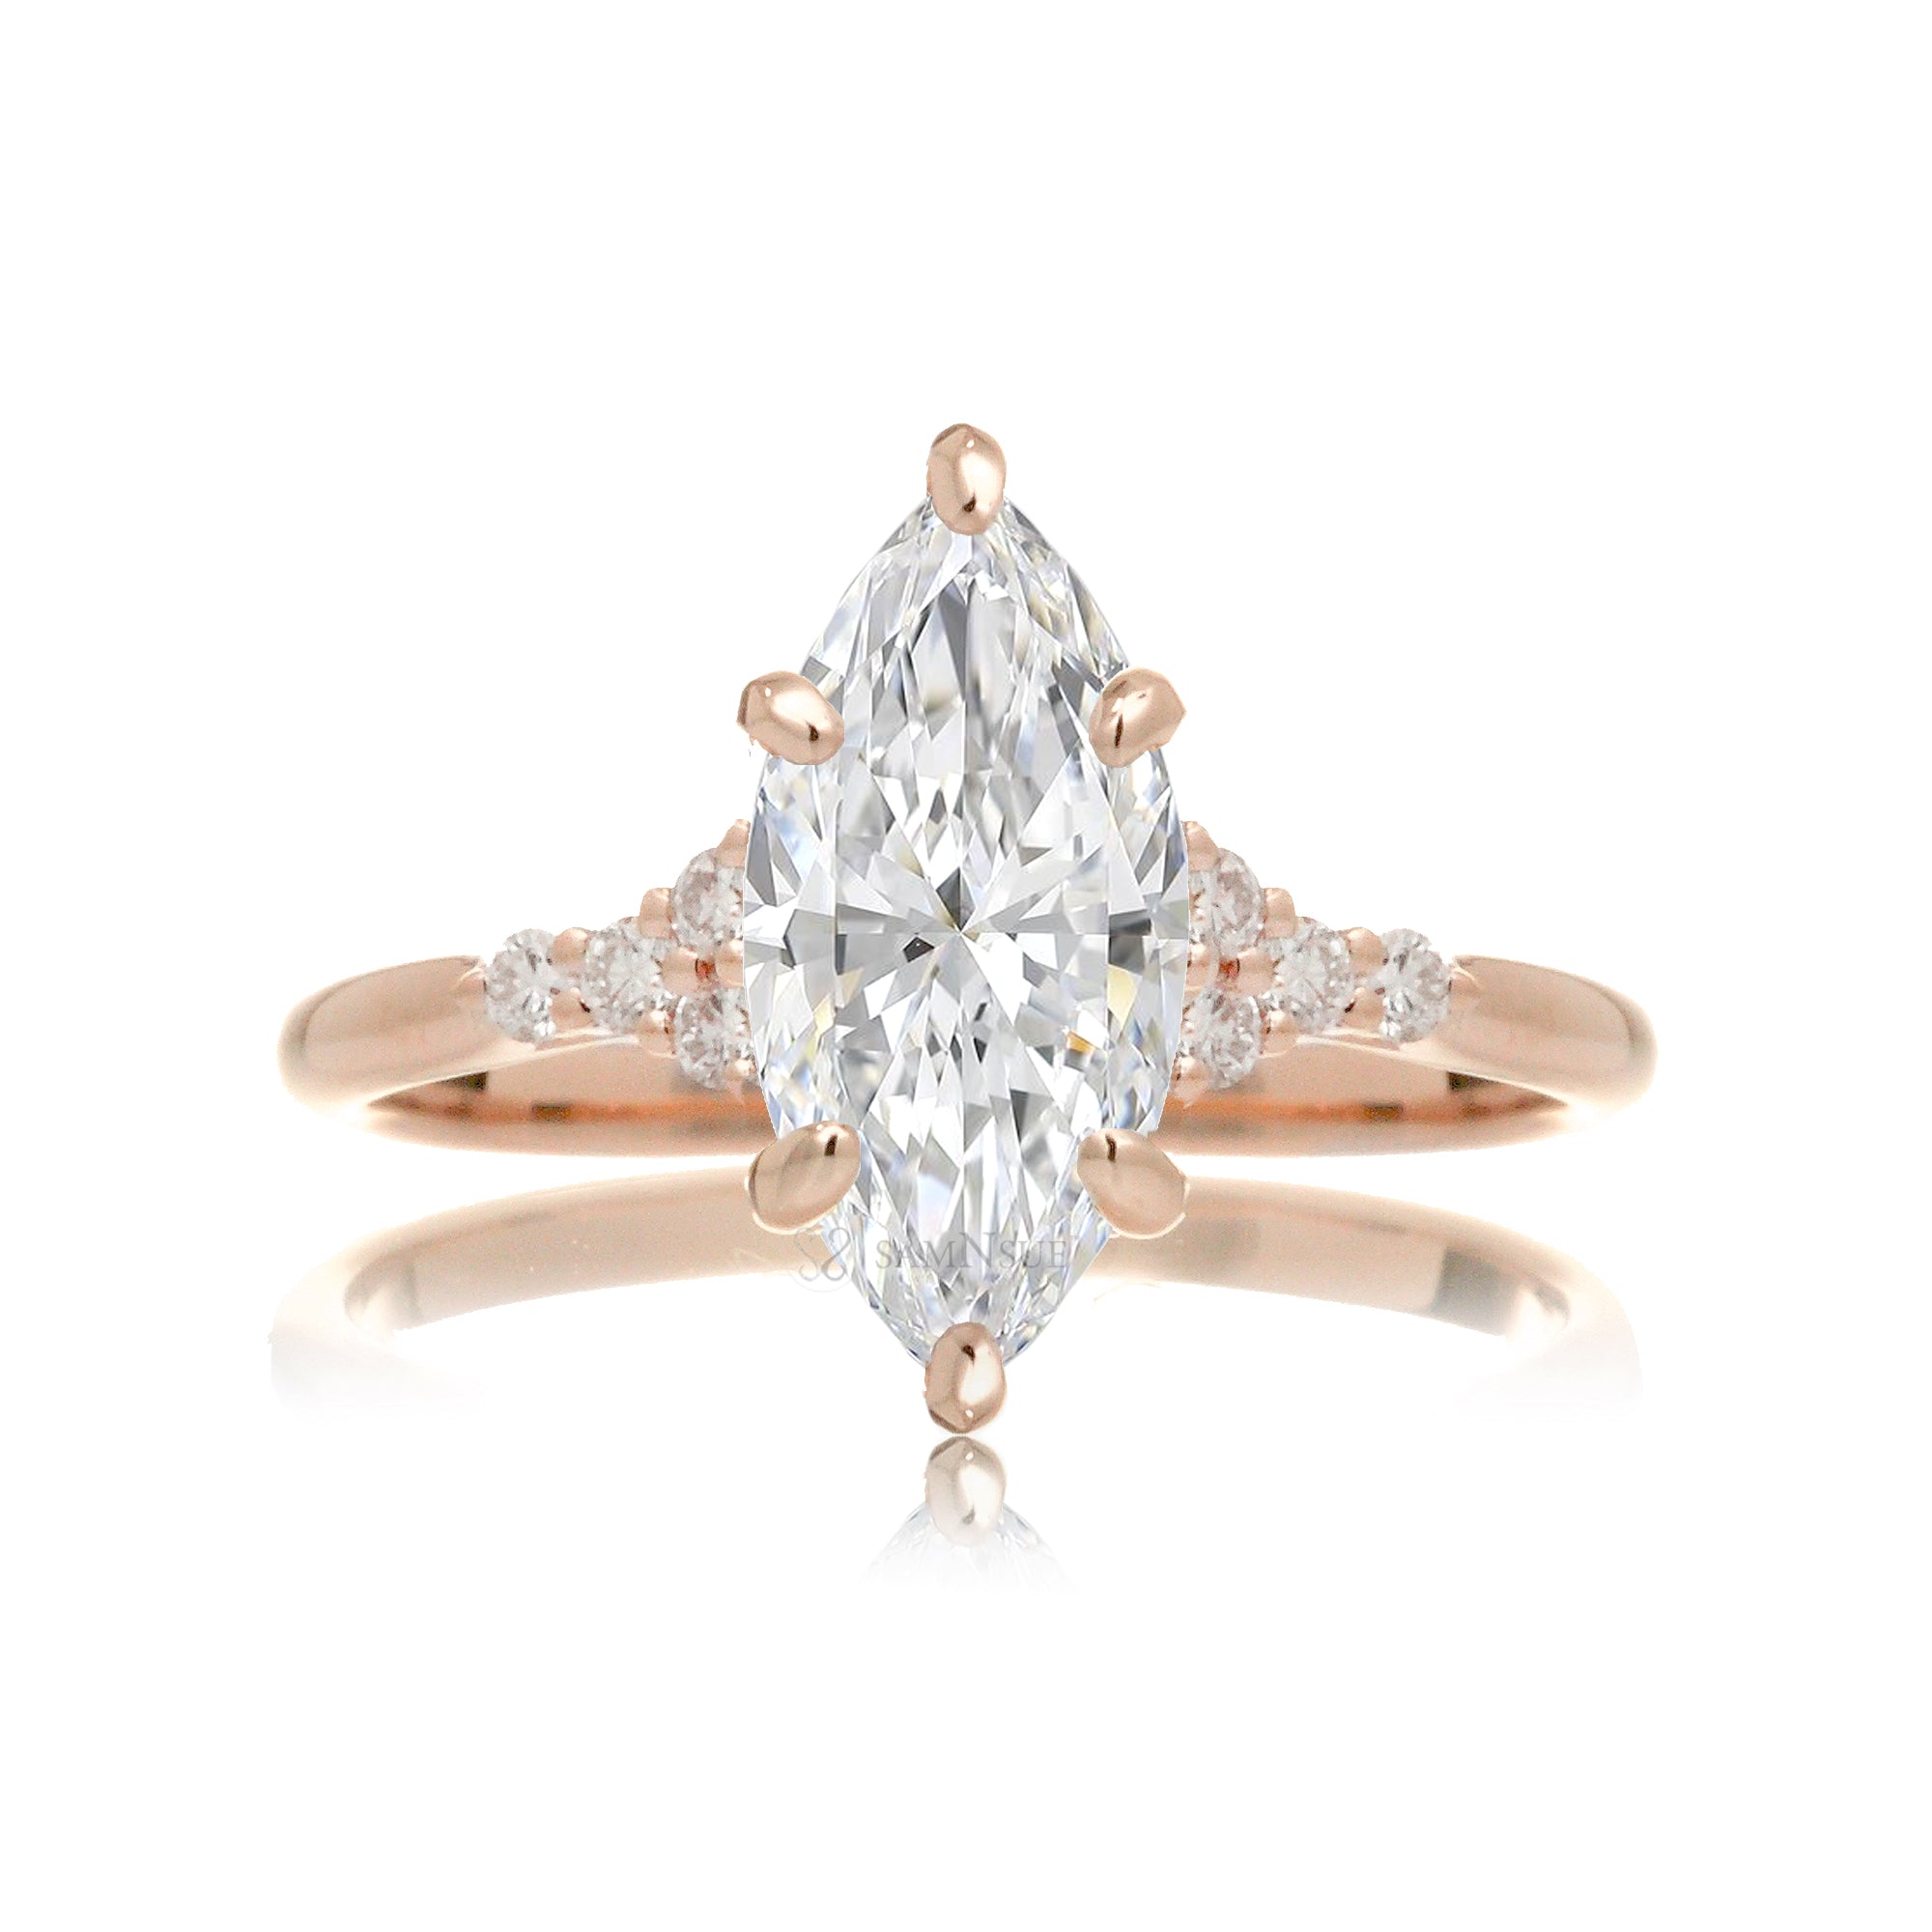 Marquise engagement ring with side stones and a thin comfort fit band in rose gold - the Chloe